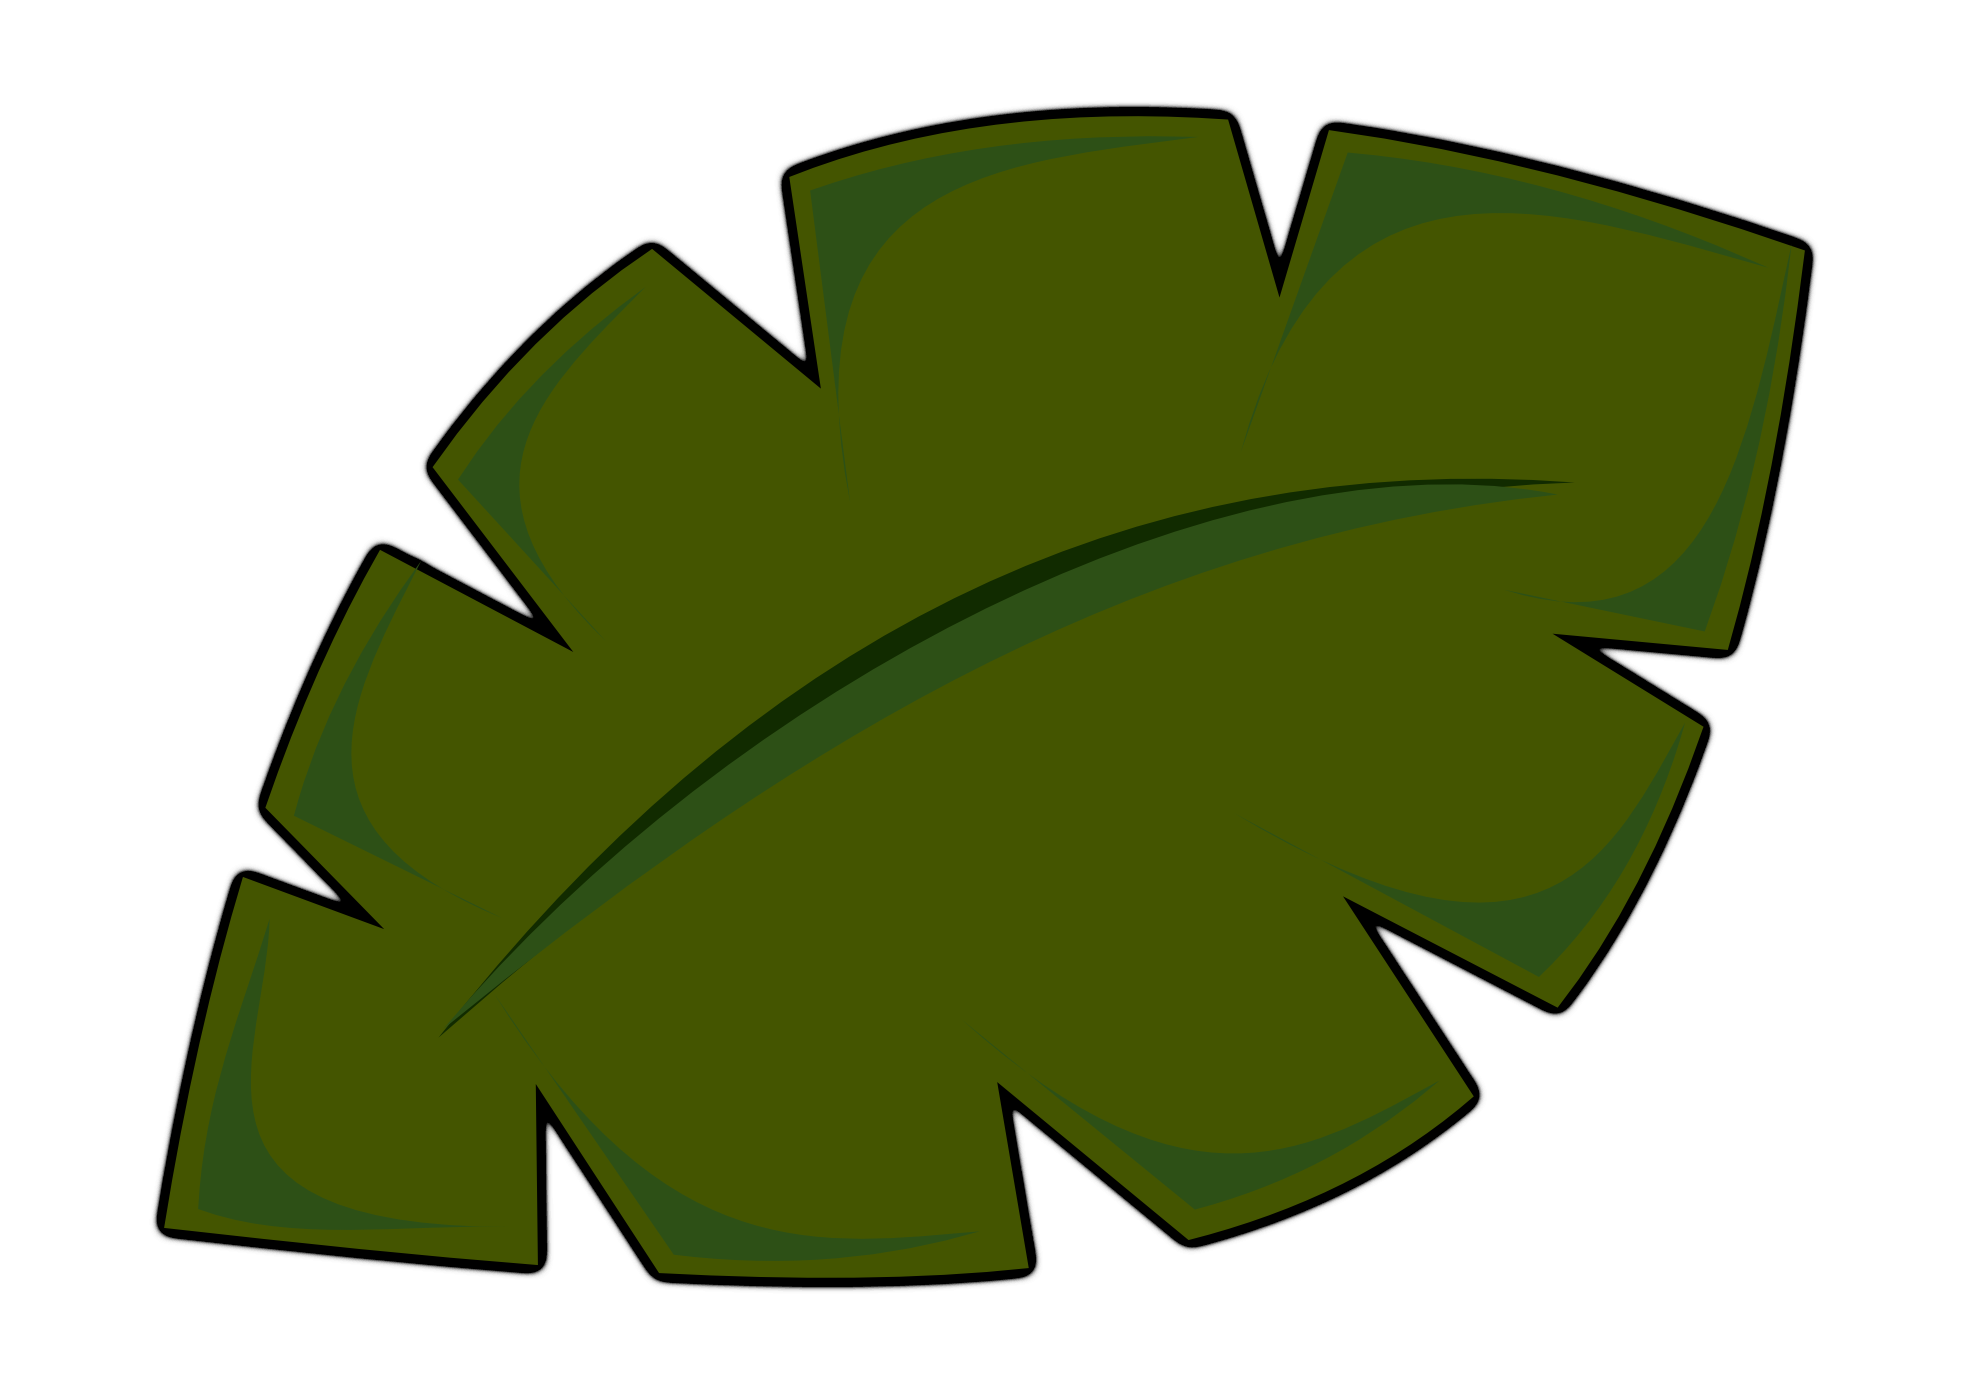 Png Jungle Leaf - Jungle Leaves Clip Art Black And White, Transparent background PNG HD thumbnail